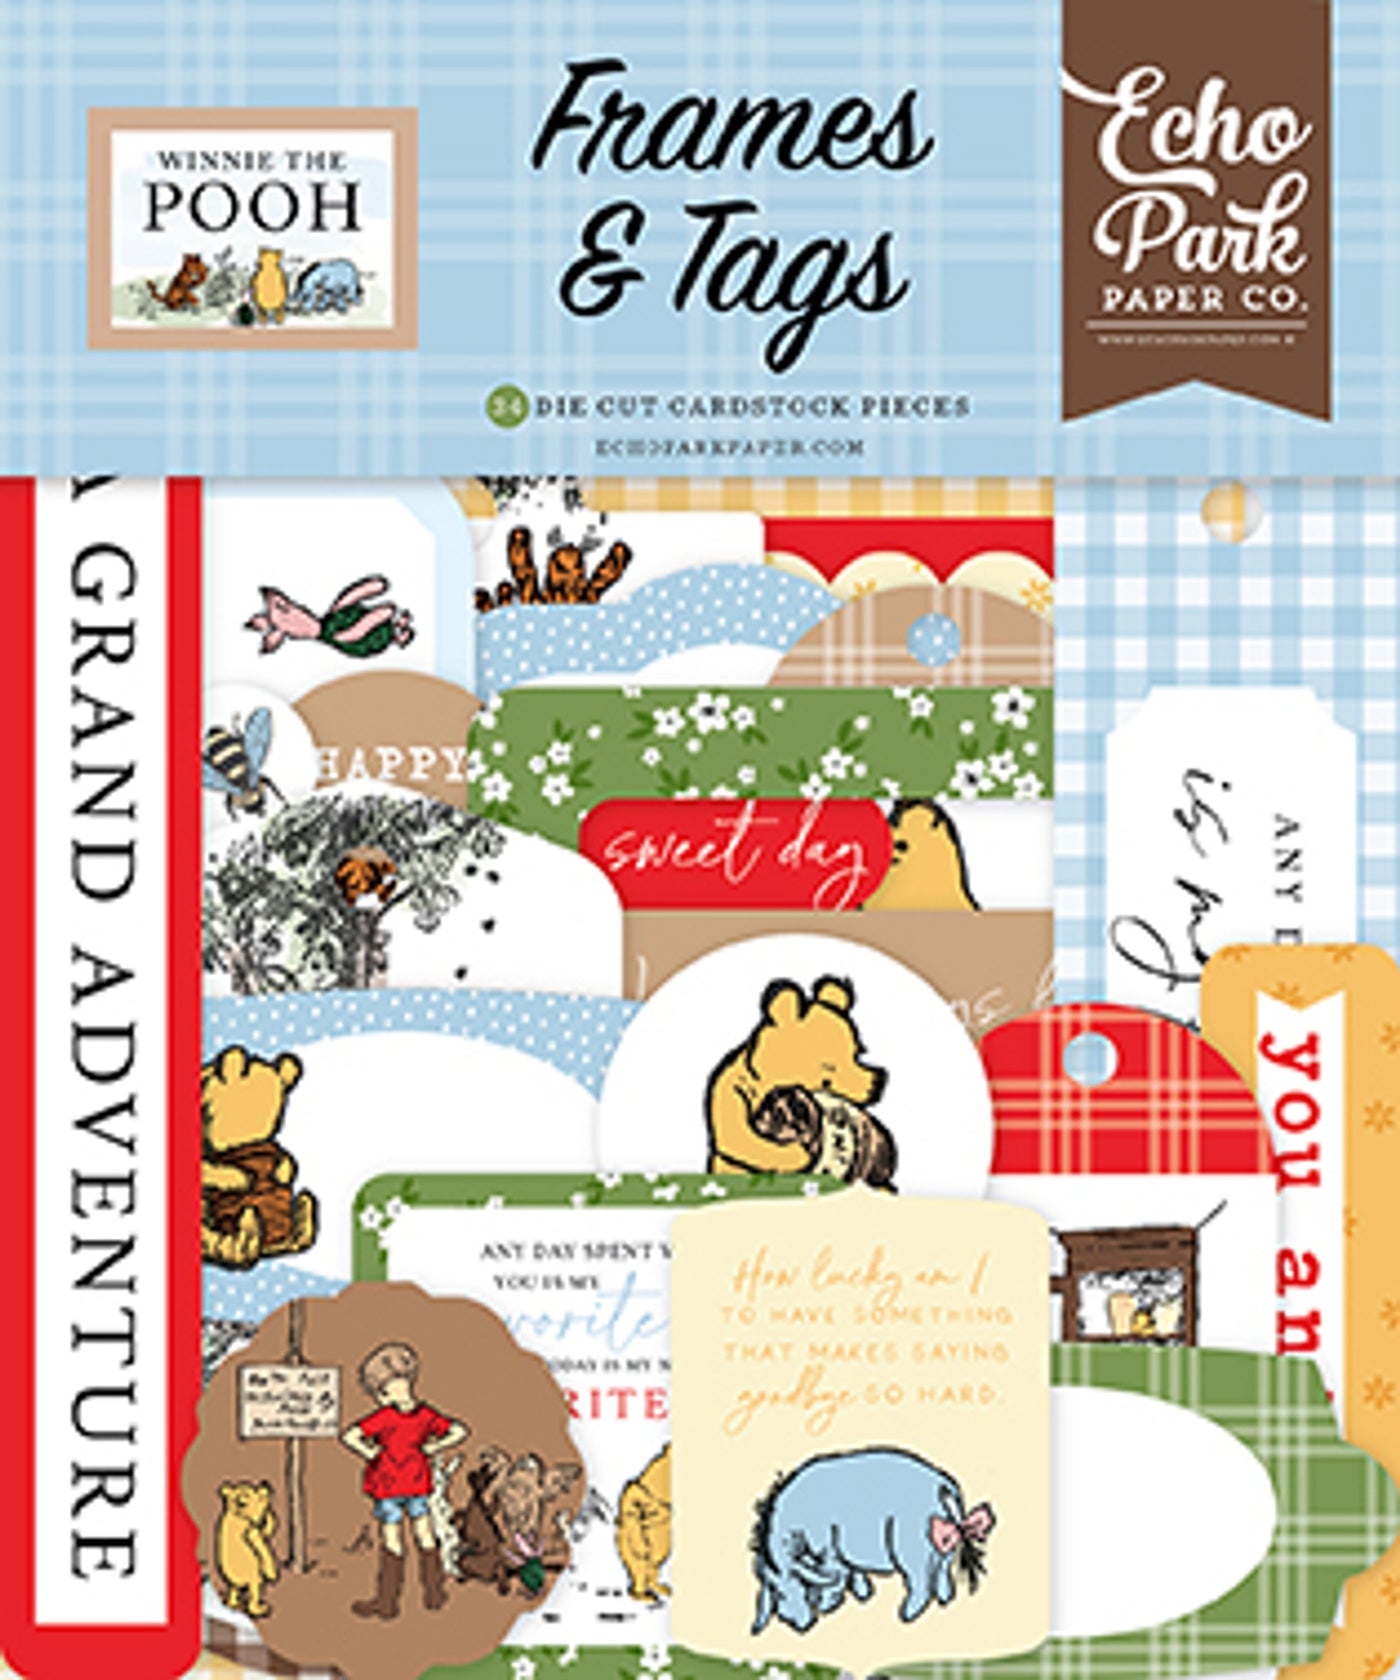 Winnie The Pooh Frames & Tags Die Cut Cardstock Pack includes 33 die-cut shapes ready to embellish any project. 